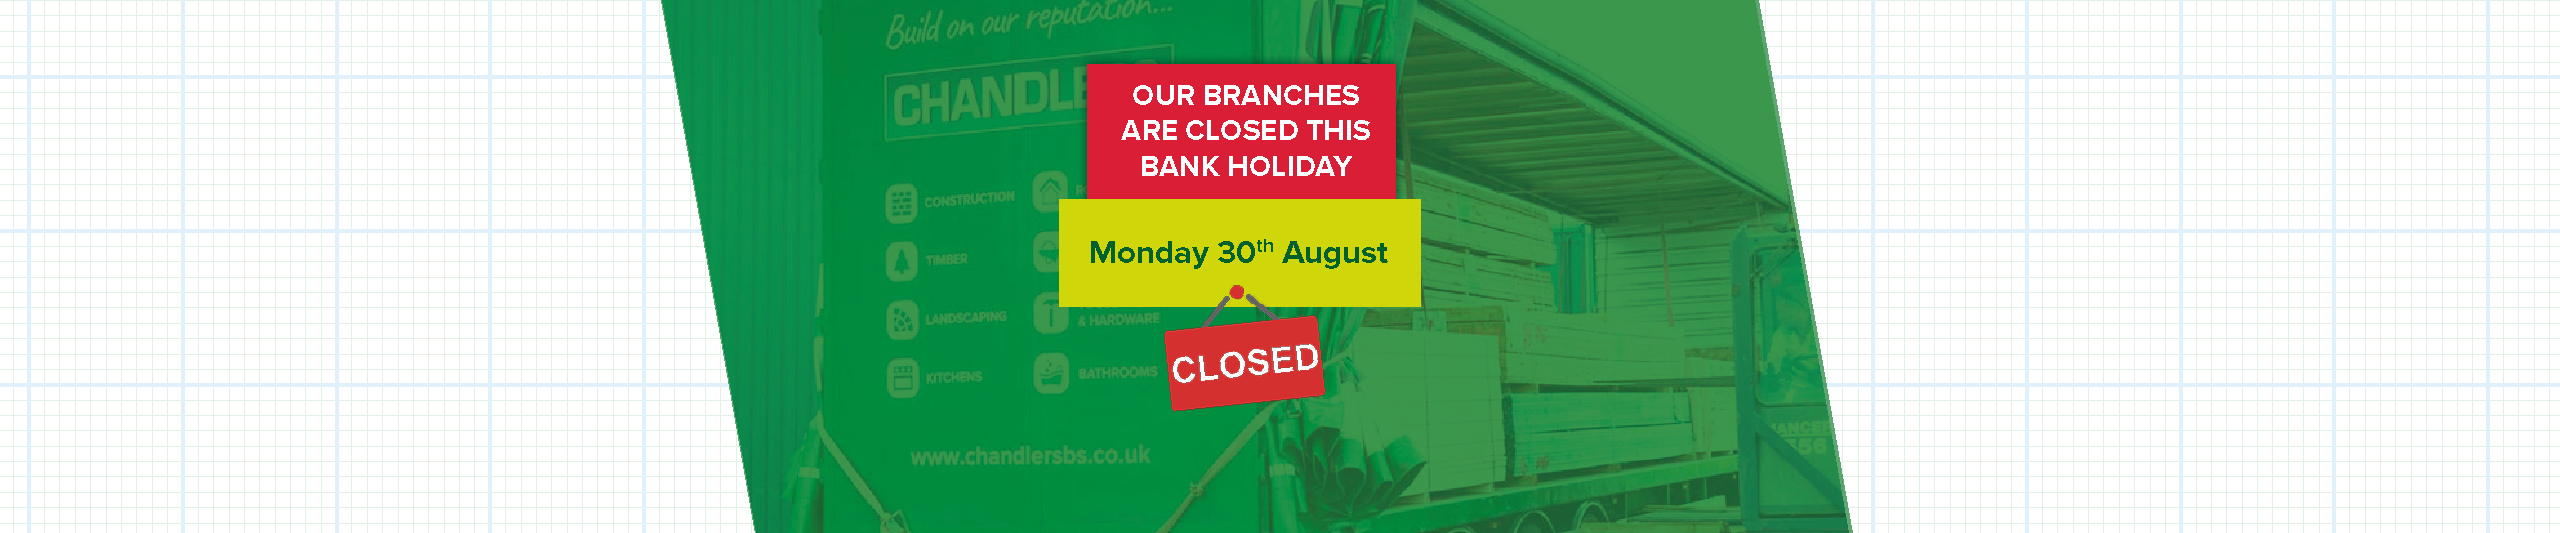 We're Closed on Bank Holiday Monday